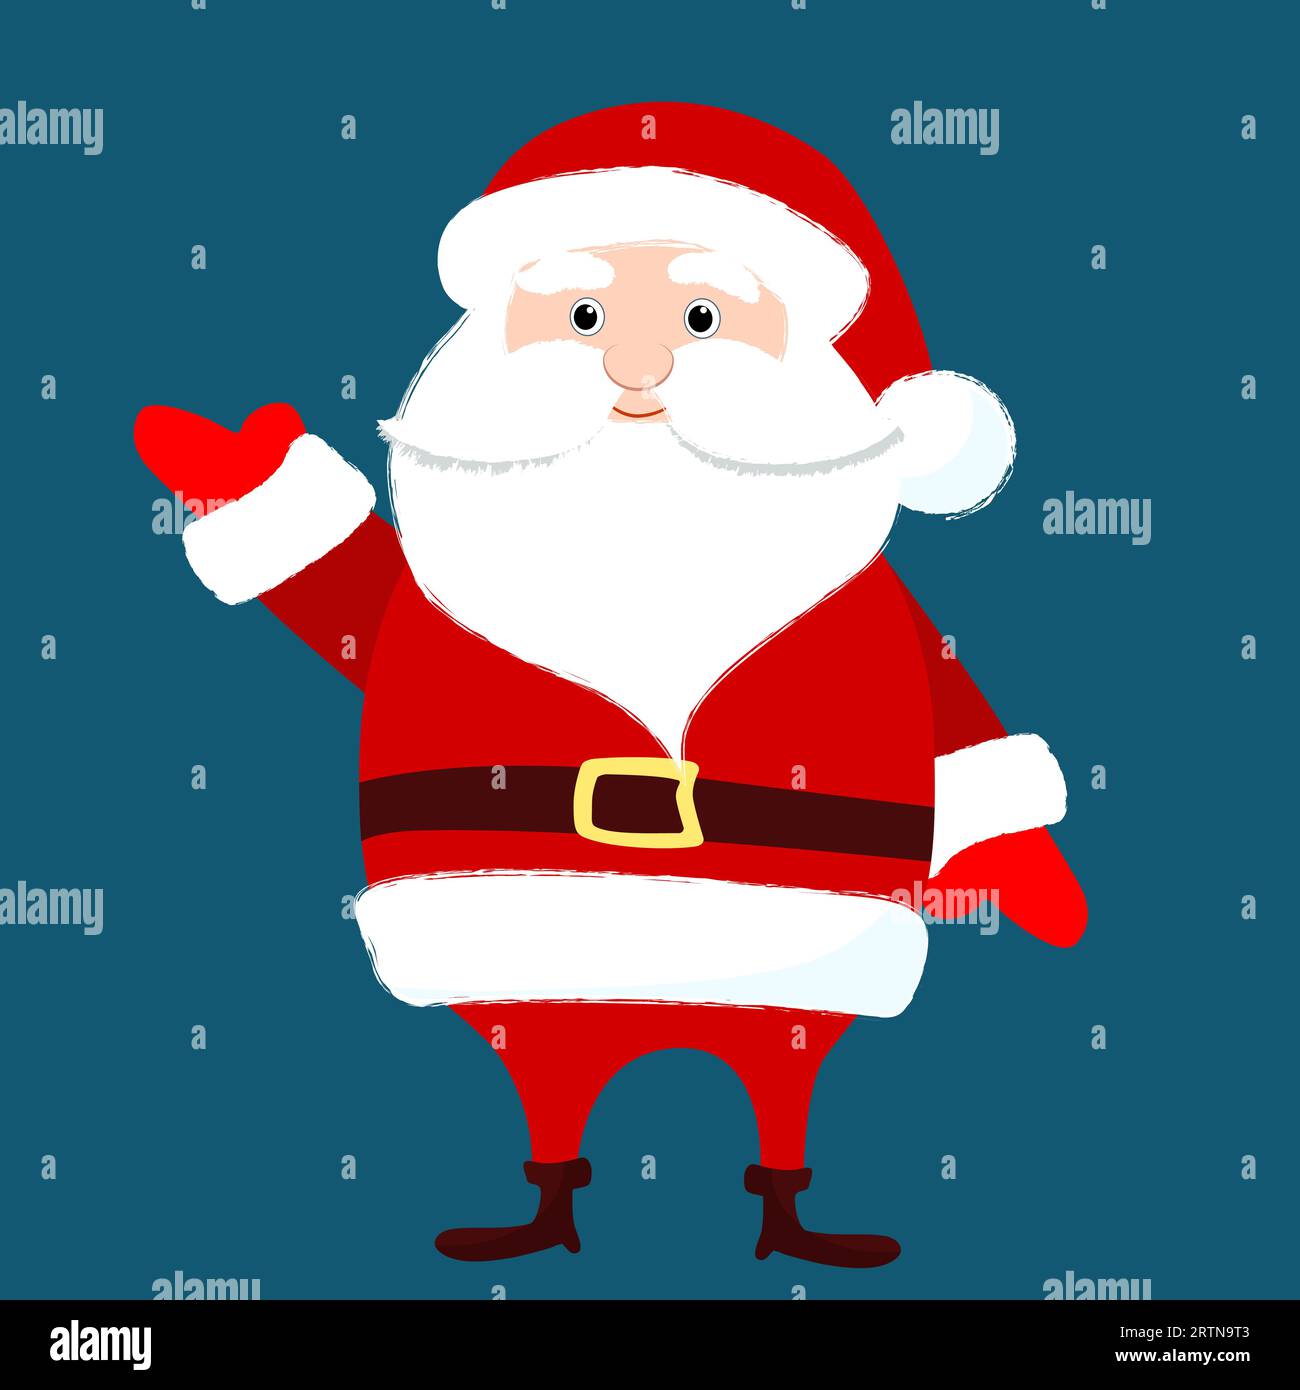 Santa Claus is standing straight and waving hello. Winter funny character design. Christmas illustration in cartoon flat style. Stock Vector